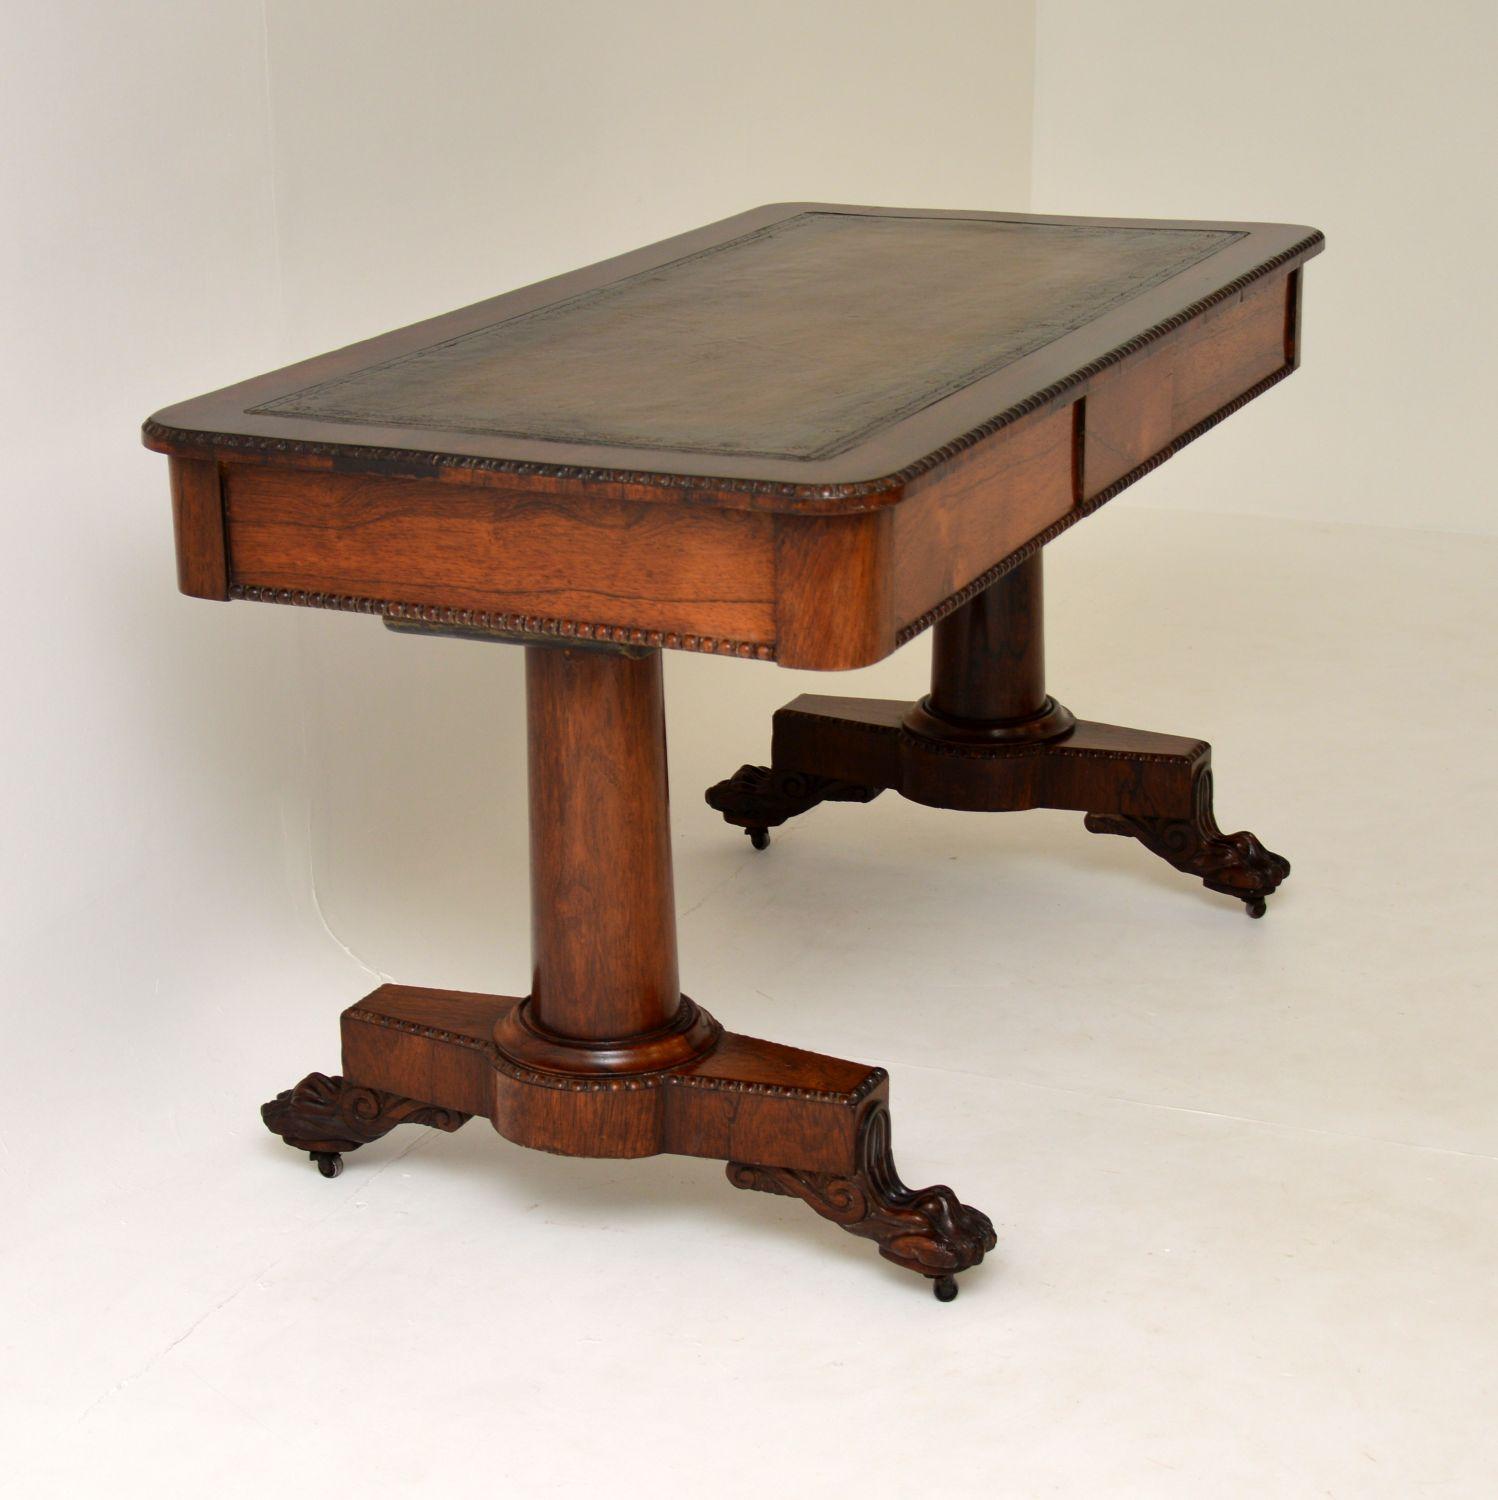 An absolutely stunning antique writing table in wood with an inset leather top. This is from the William IV period and dates from circa 1830-1840 period.

It is large and impressive, the quality is fantastic throughout. This sits on two thick